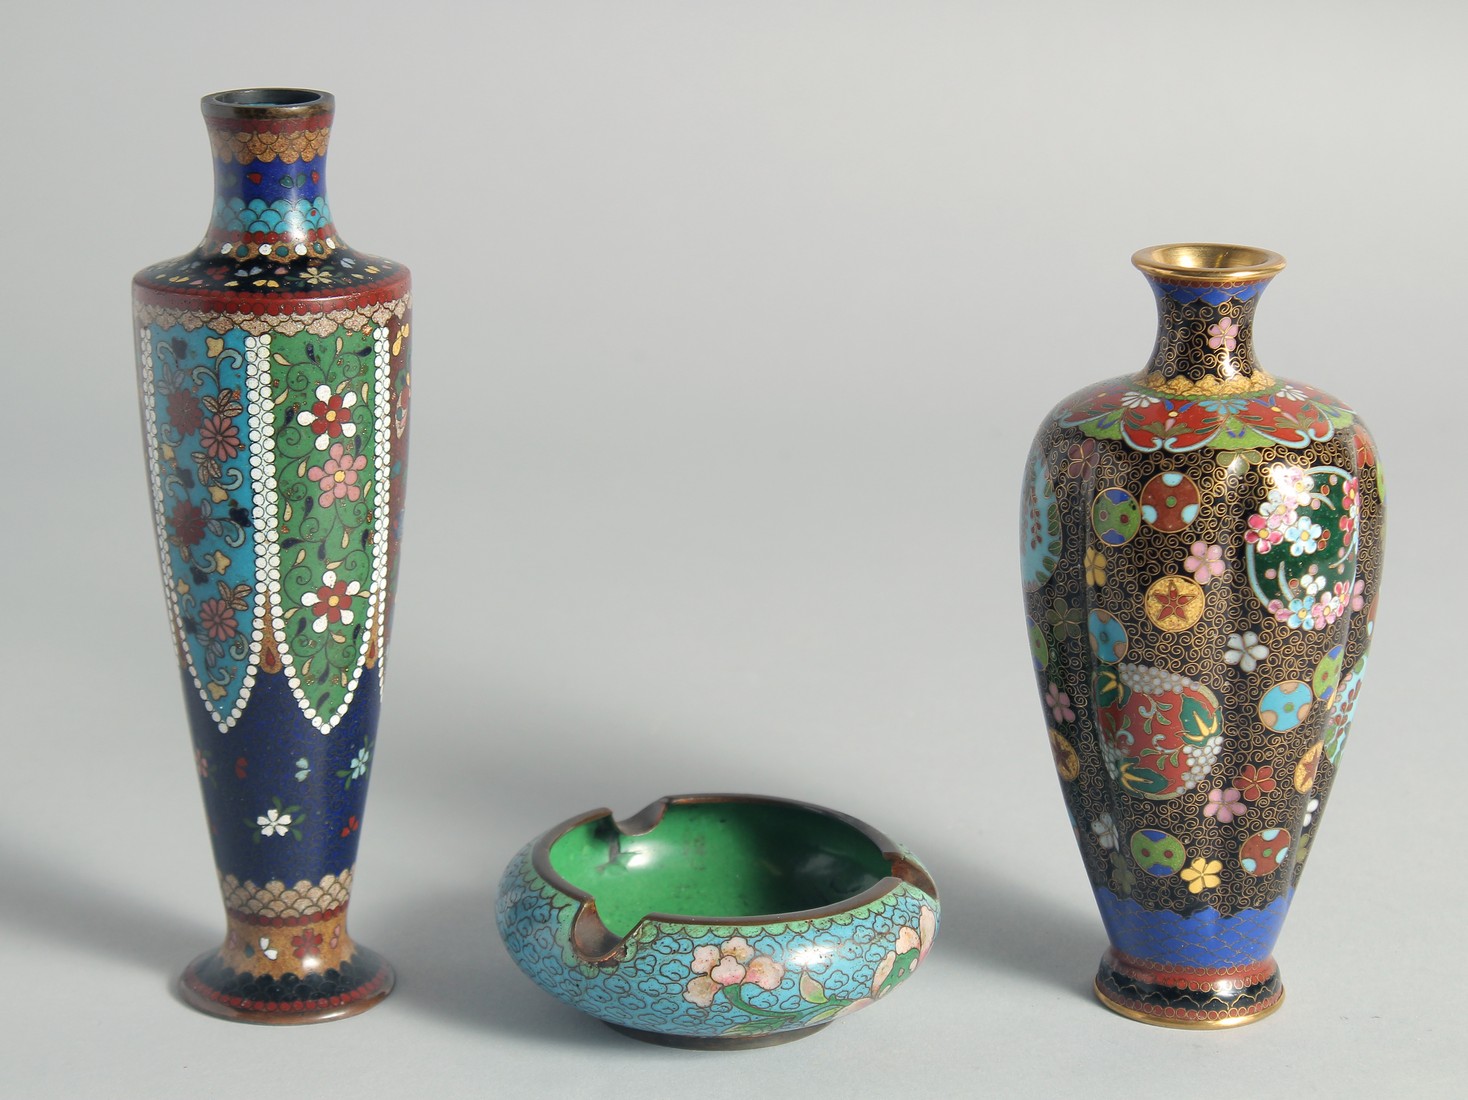 TWO SMALL JAPANESE CLOISONNE VASES, each decorated with floral motifs, 18cm and 15.5cm, together